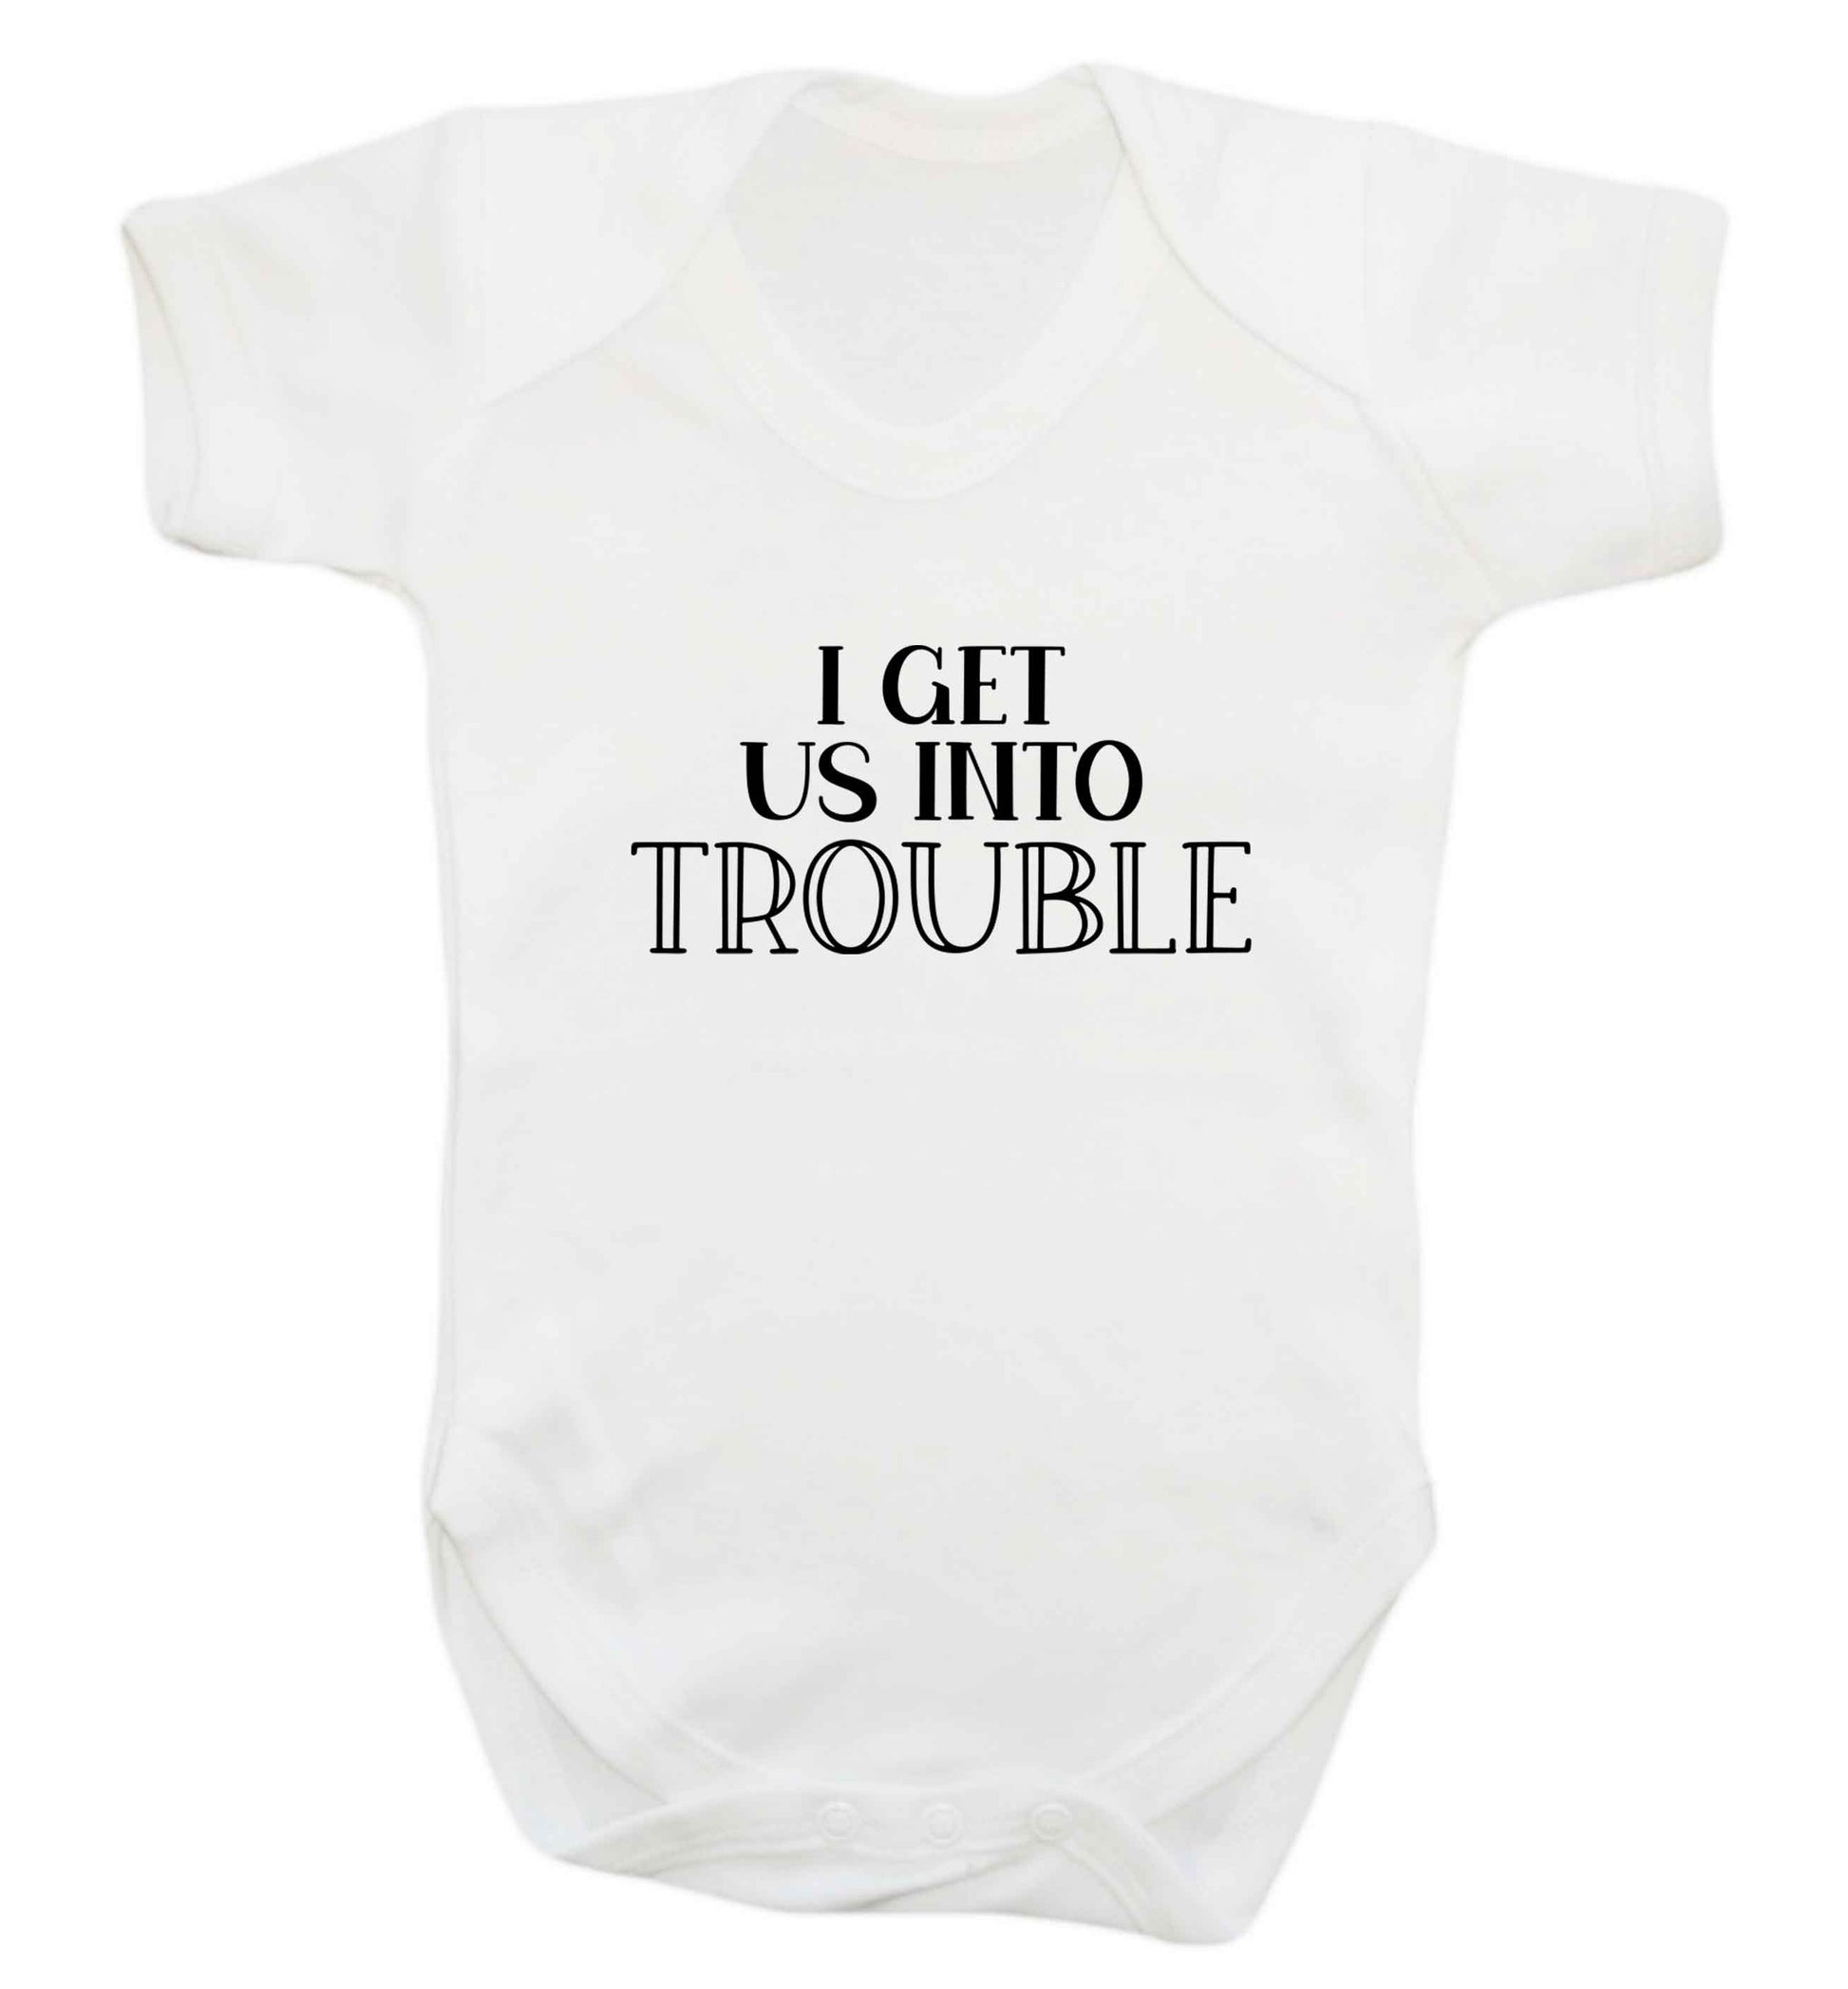 I get us into trouble baby vest white 18-24 months